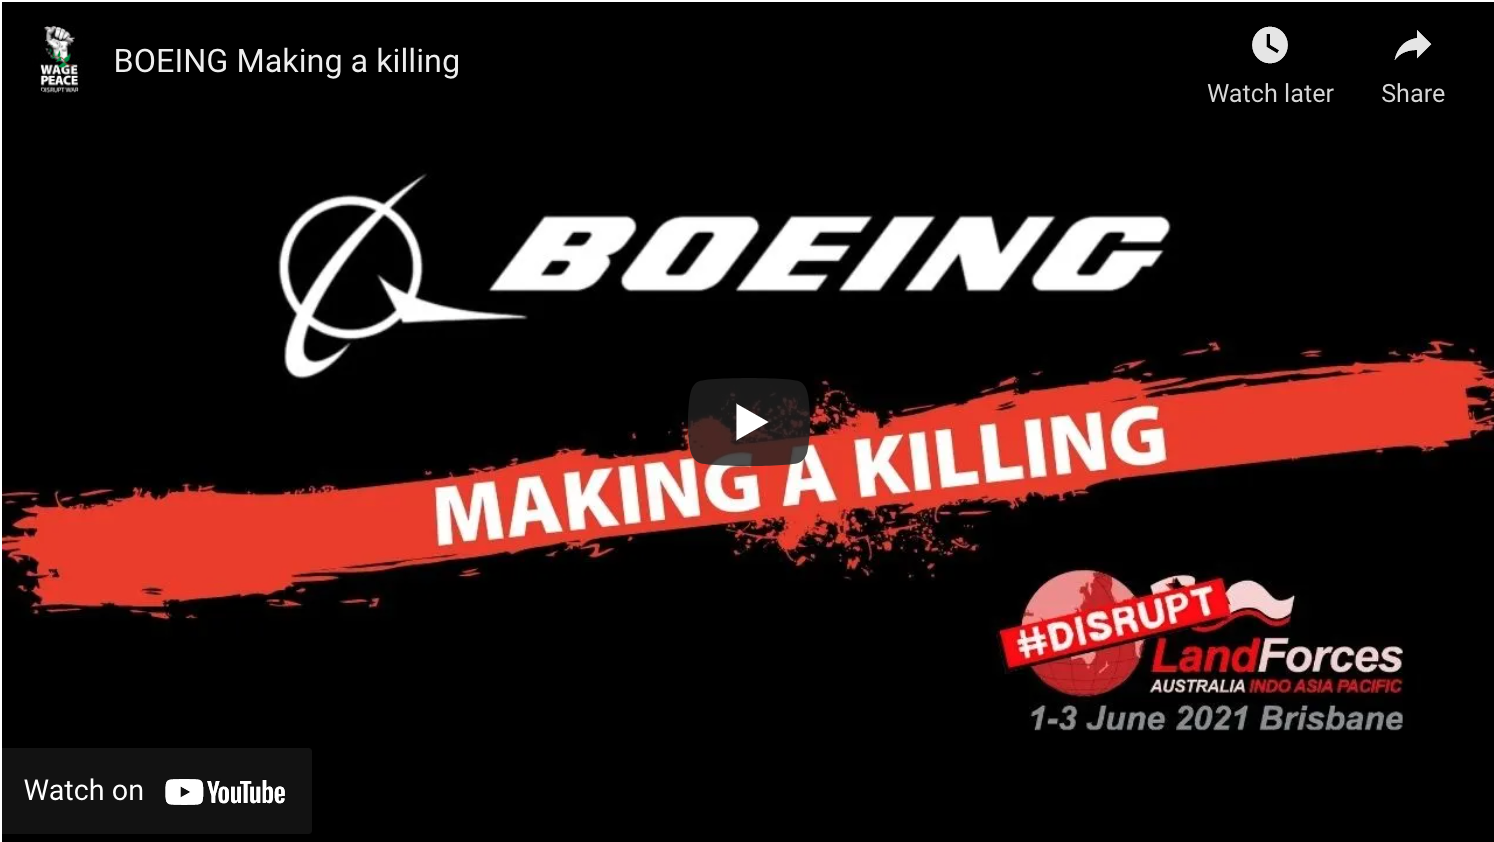 Boeing video by landforces